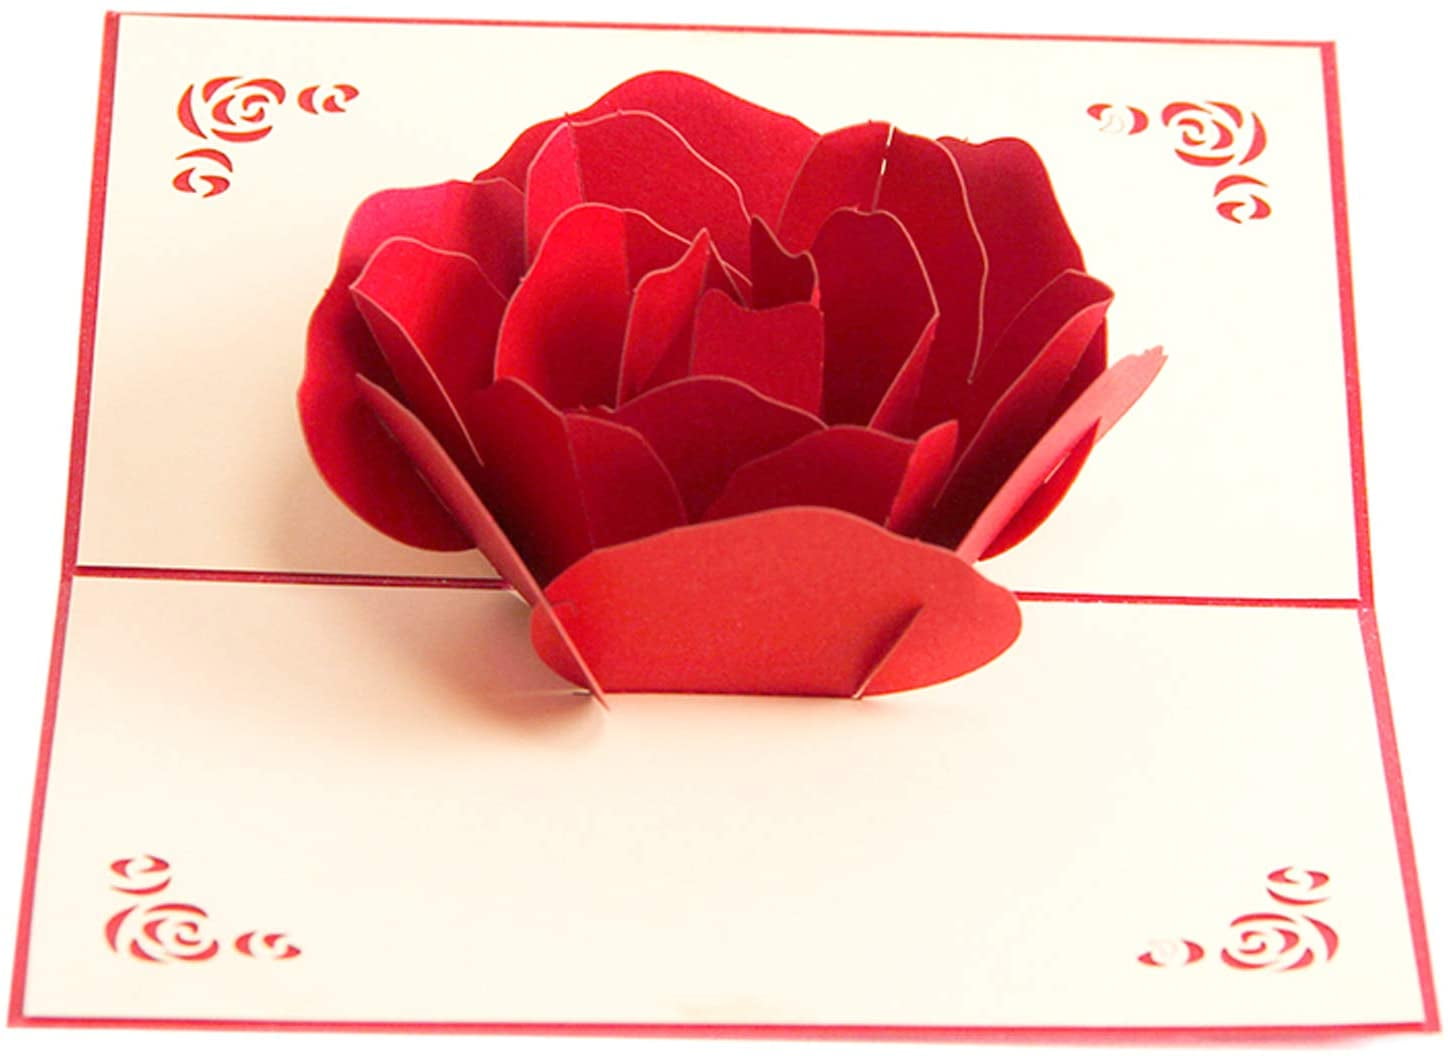 Girlfriend Boyfriend Gift for Her Him Wife Wedding Wooden Romantic Card for Valentines Day,Anniversary Romantic Red Rose Love Card Birthday Husband 